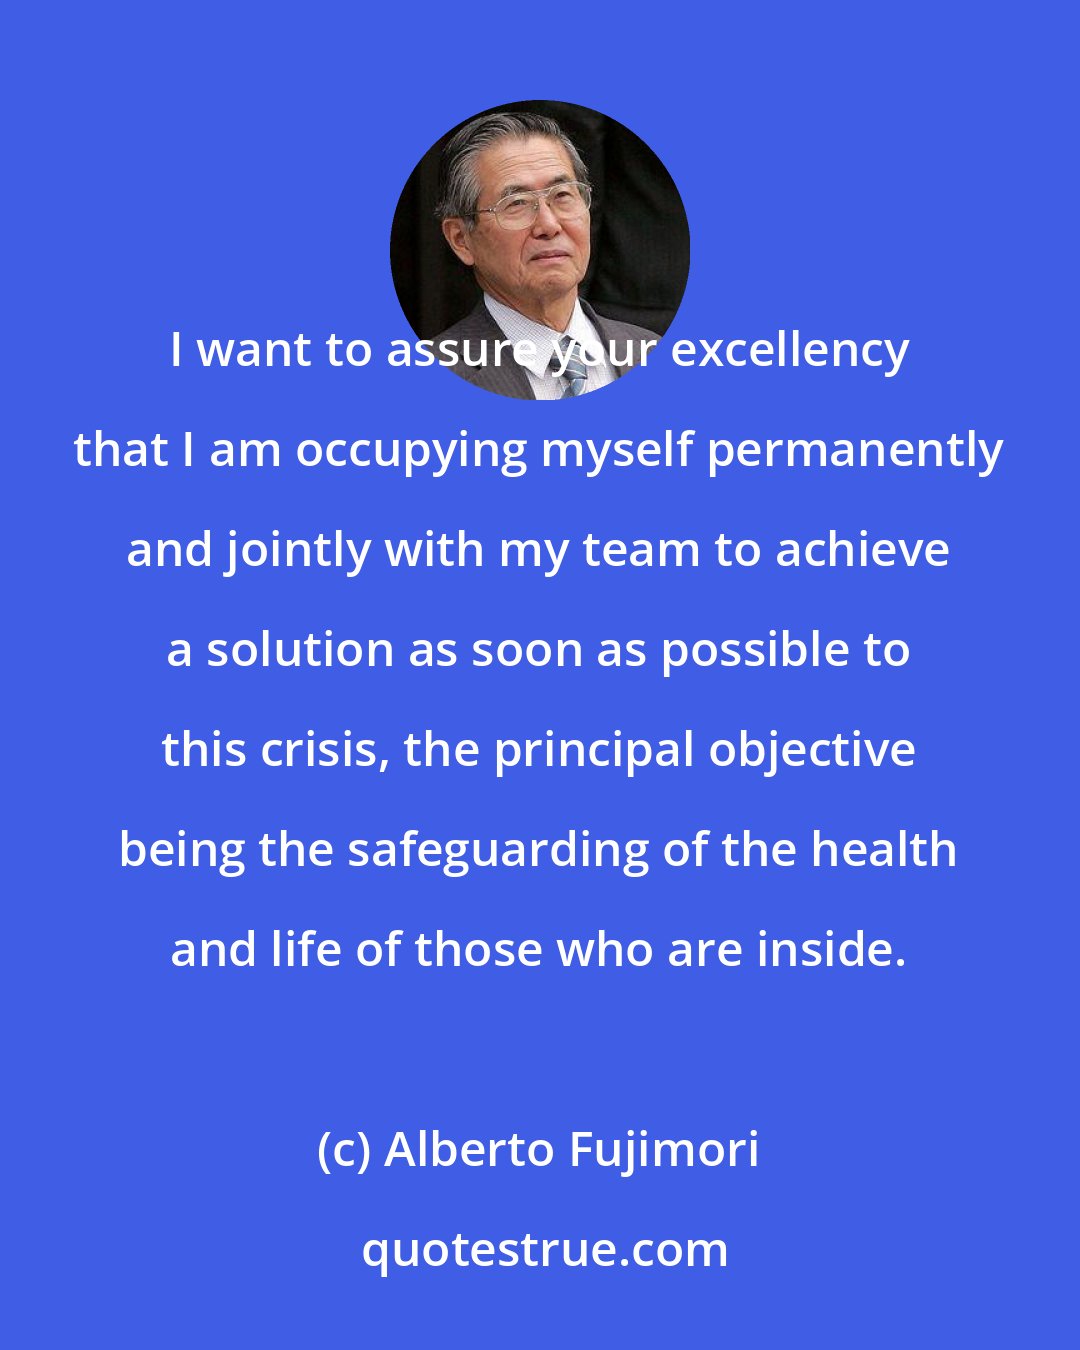 Alberto Fujimori: I want to assure your excellency that I am occupying myself permanently and jointly with my team to achieve a solution as soon as possible to this crisis, the principal objective being the safeguarding of the health and life of those who are inside.